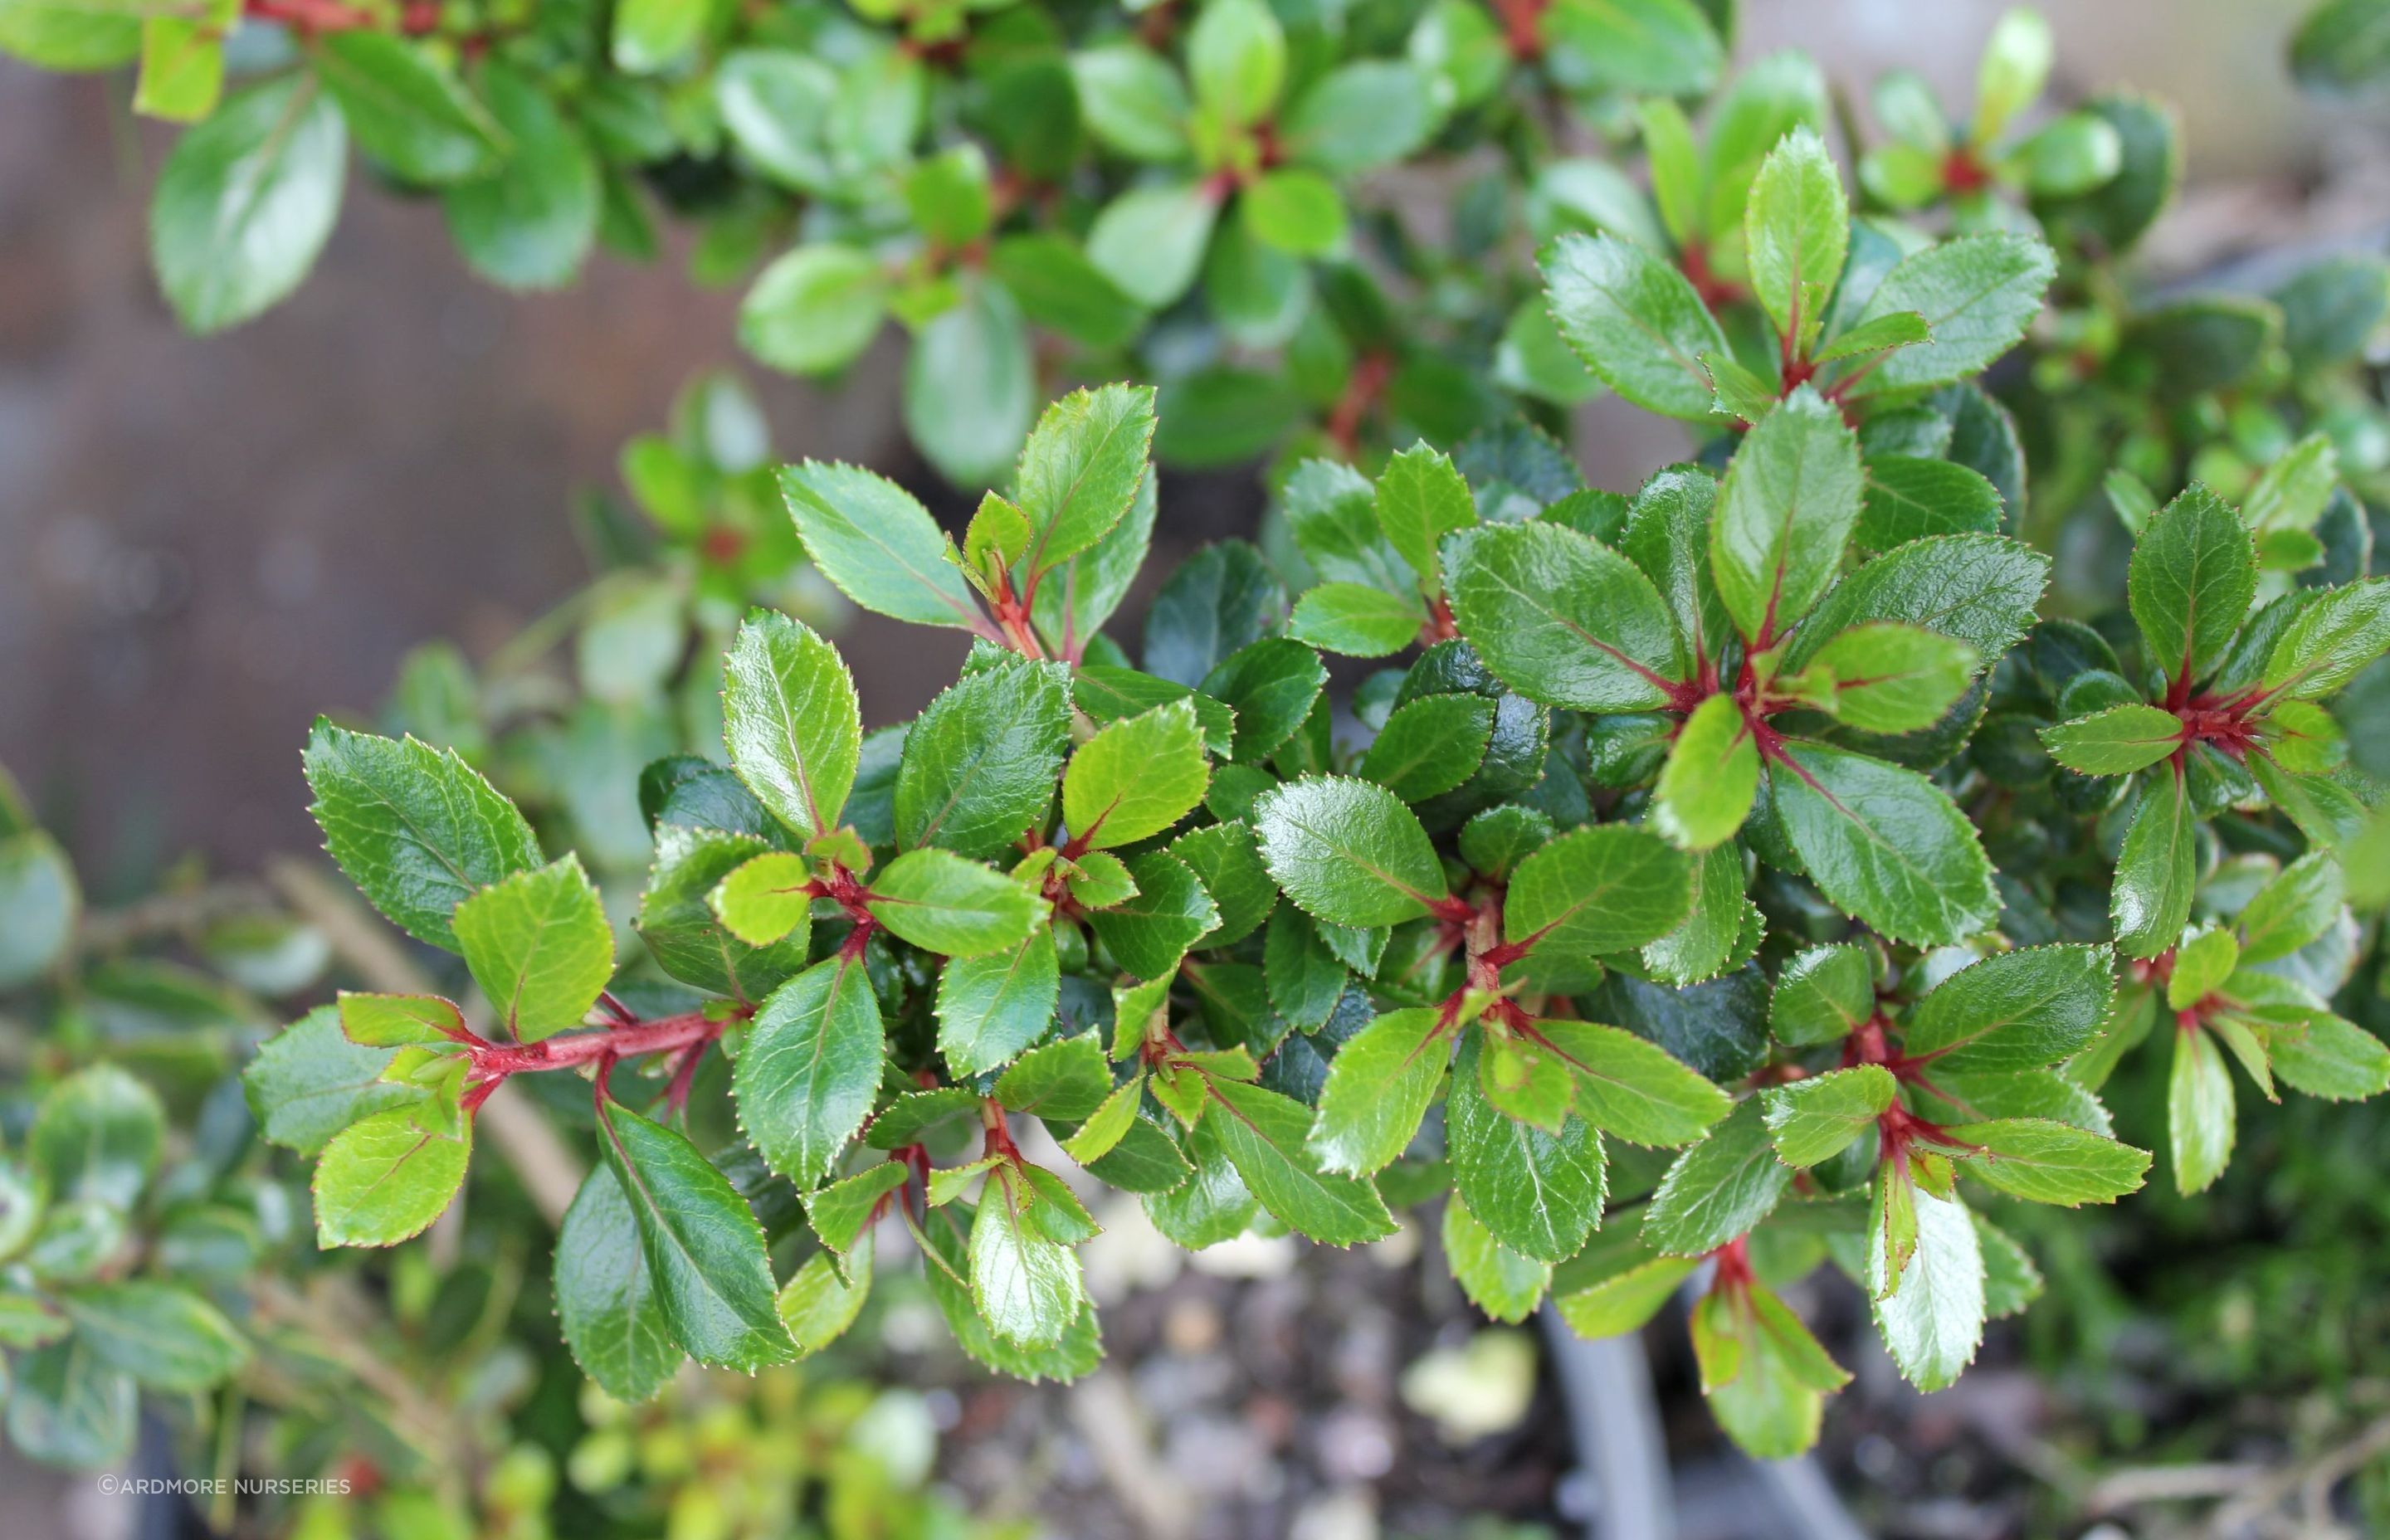 With attractive lush, glossy green foliage and red branchlets, the Escallonia 'Red Elf' is a great decorative choice.